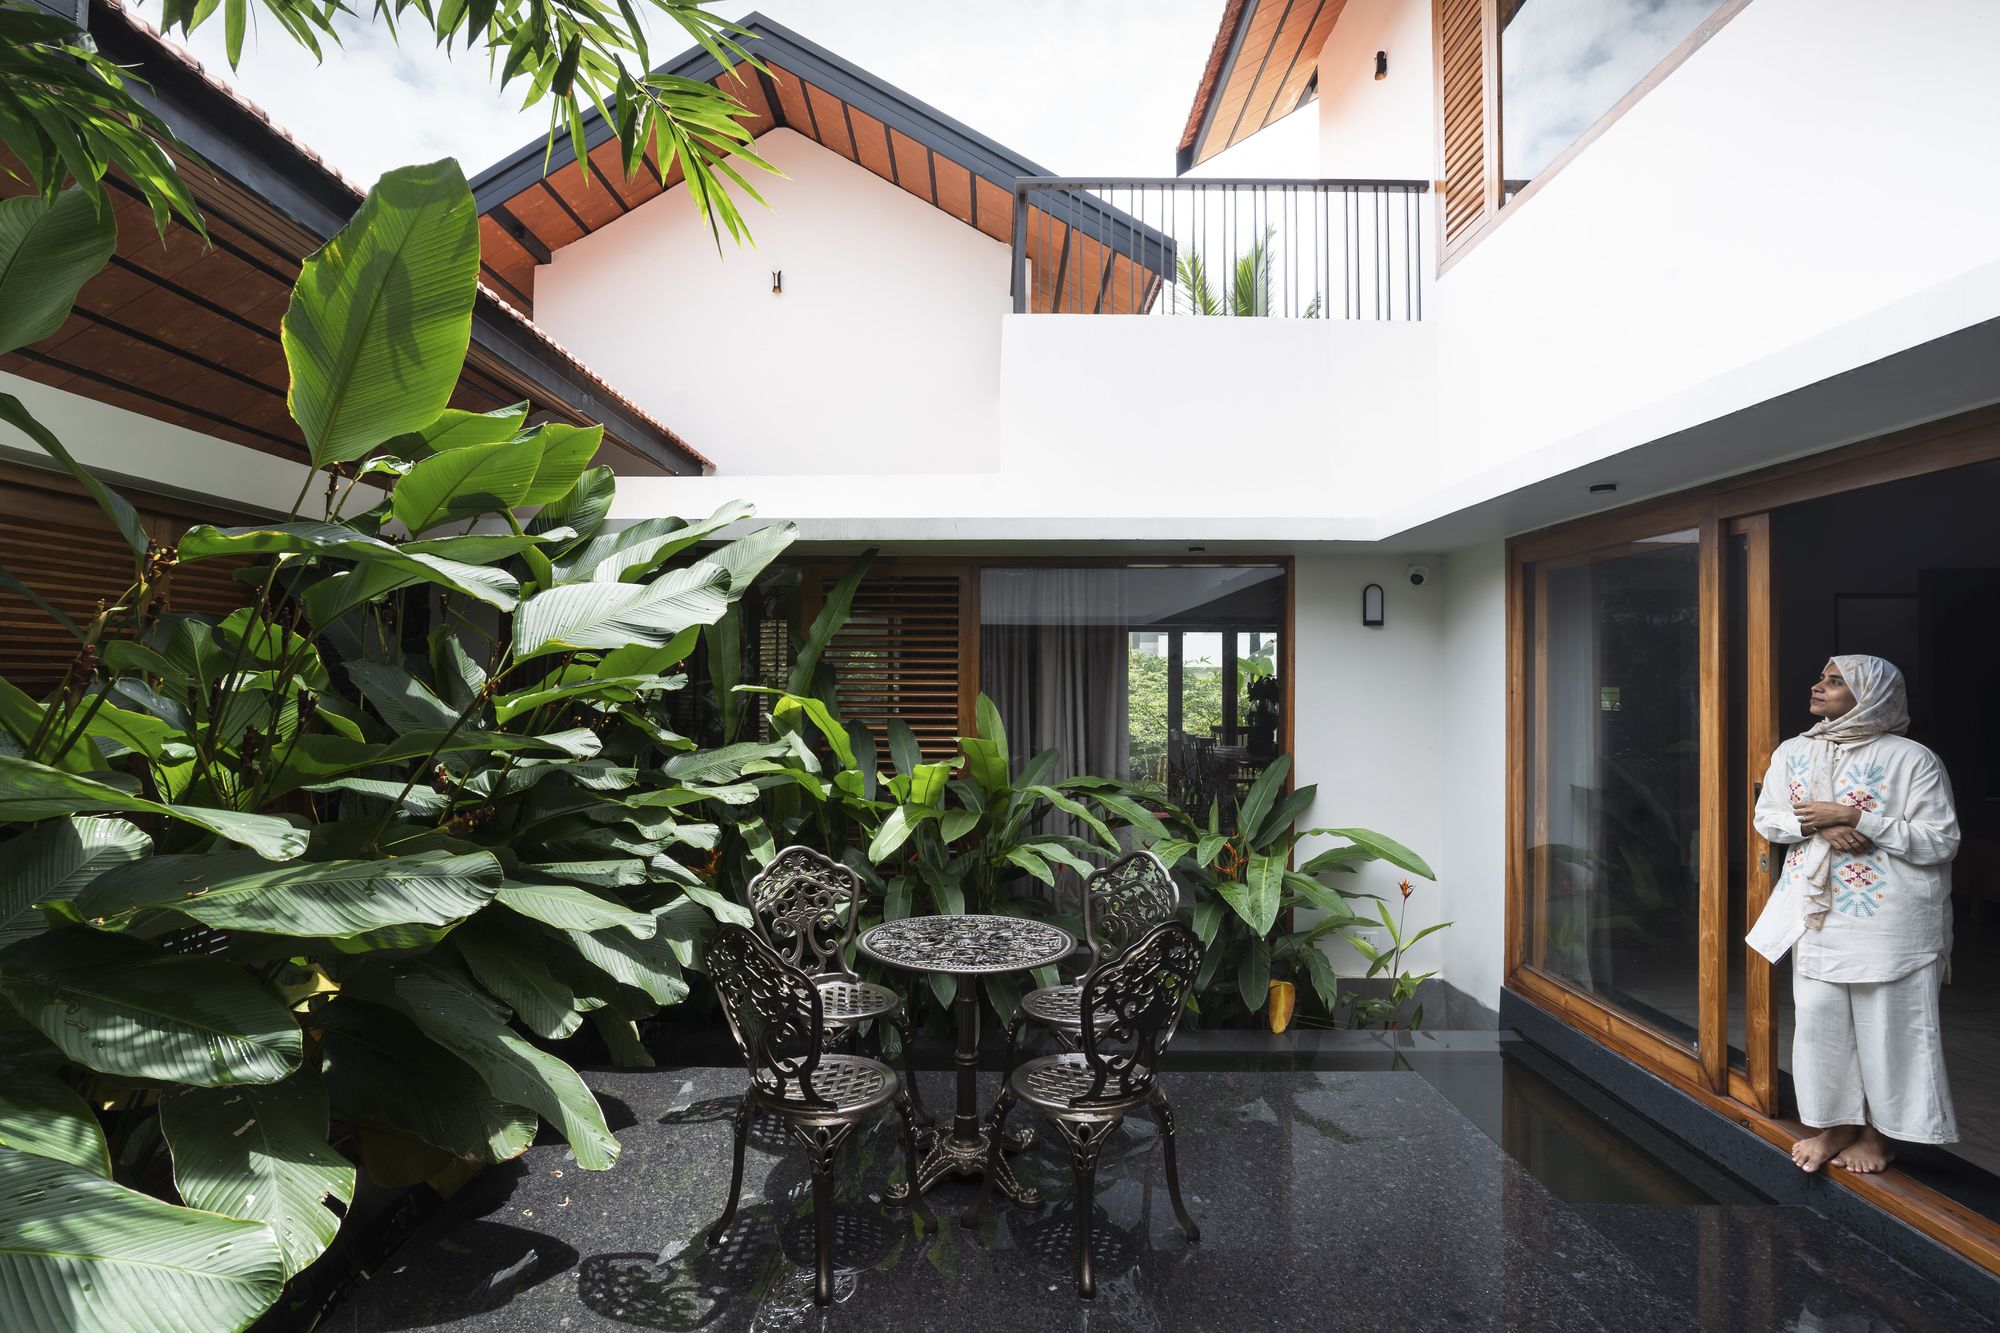 This Tropical Home in Wandoor has a Water Courtyard as the Main Anchor